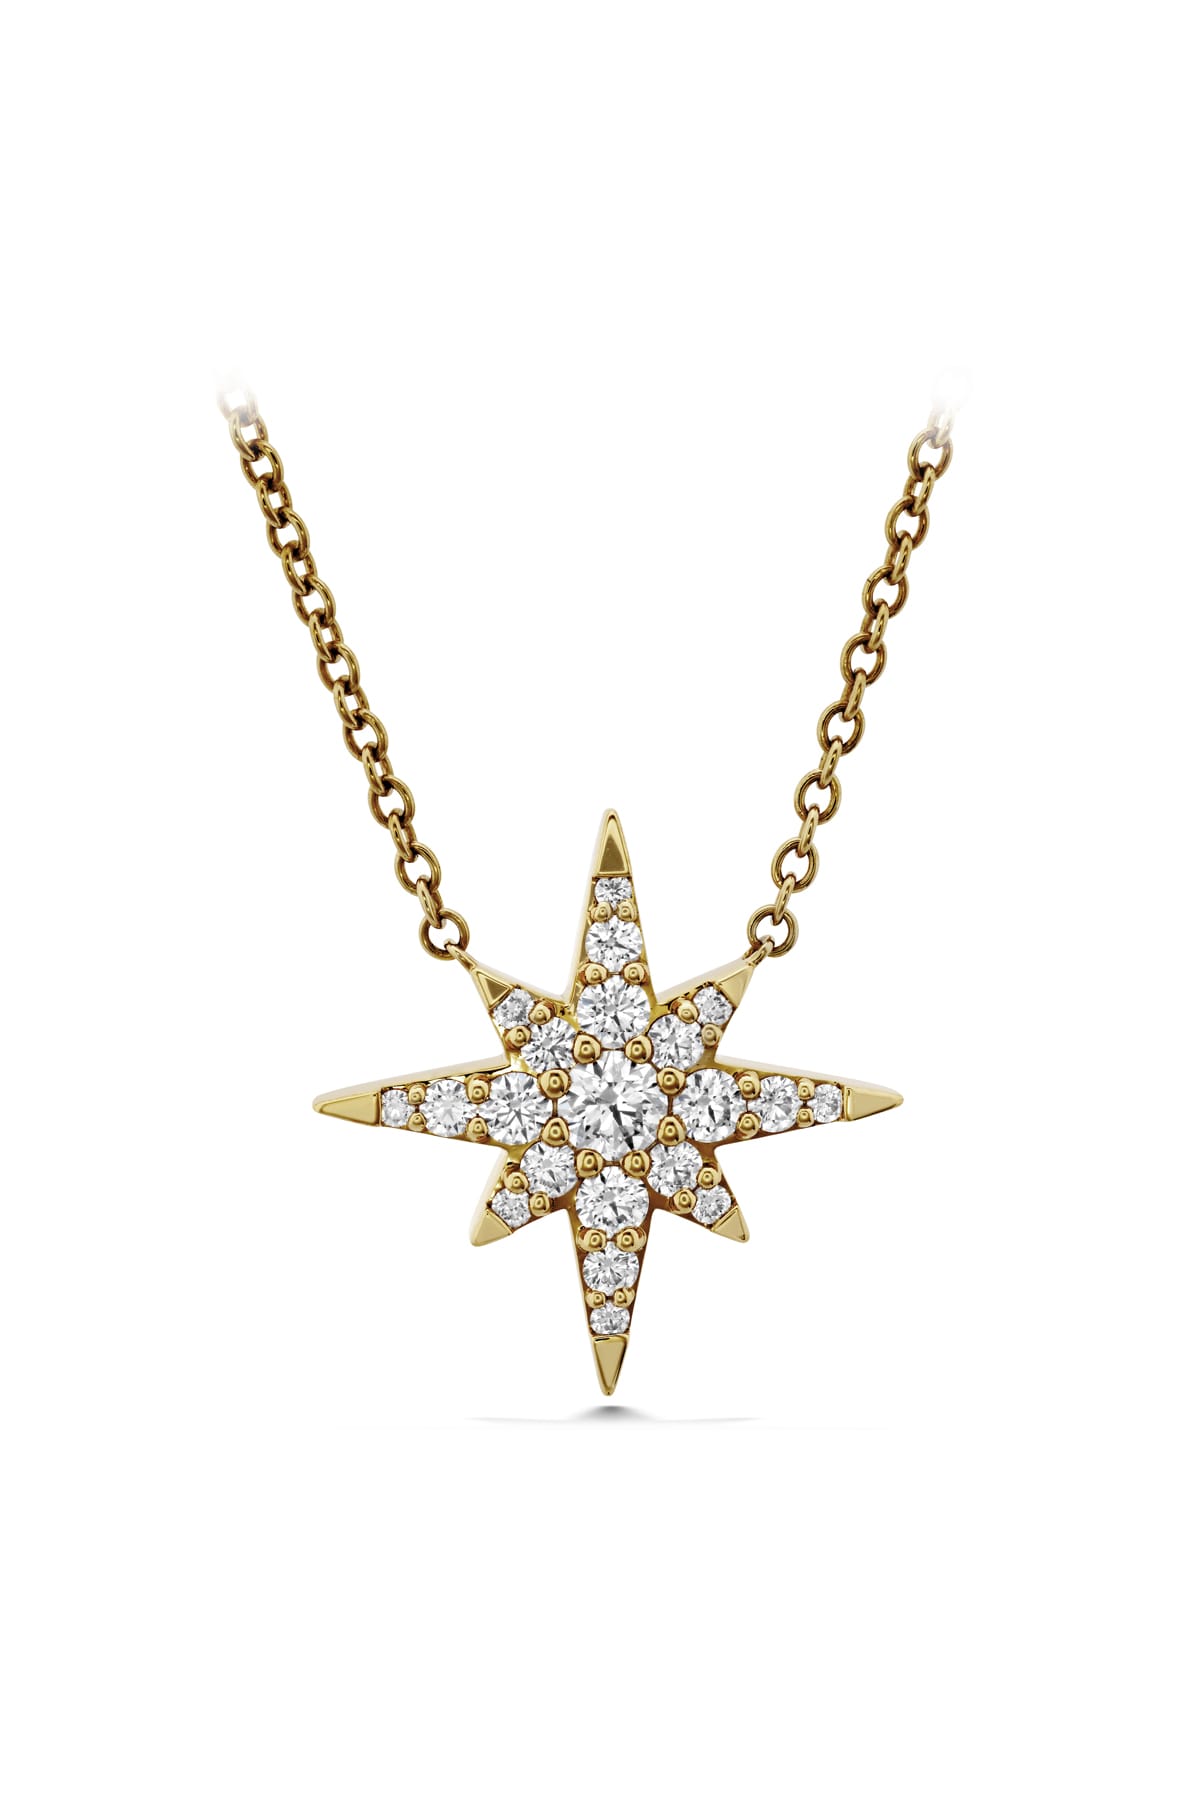 Charmed Starburst Pendant From Hearts On Fire available at LeGassick Diamonds and Jewellery Gold Coast, Australia